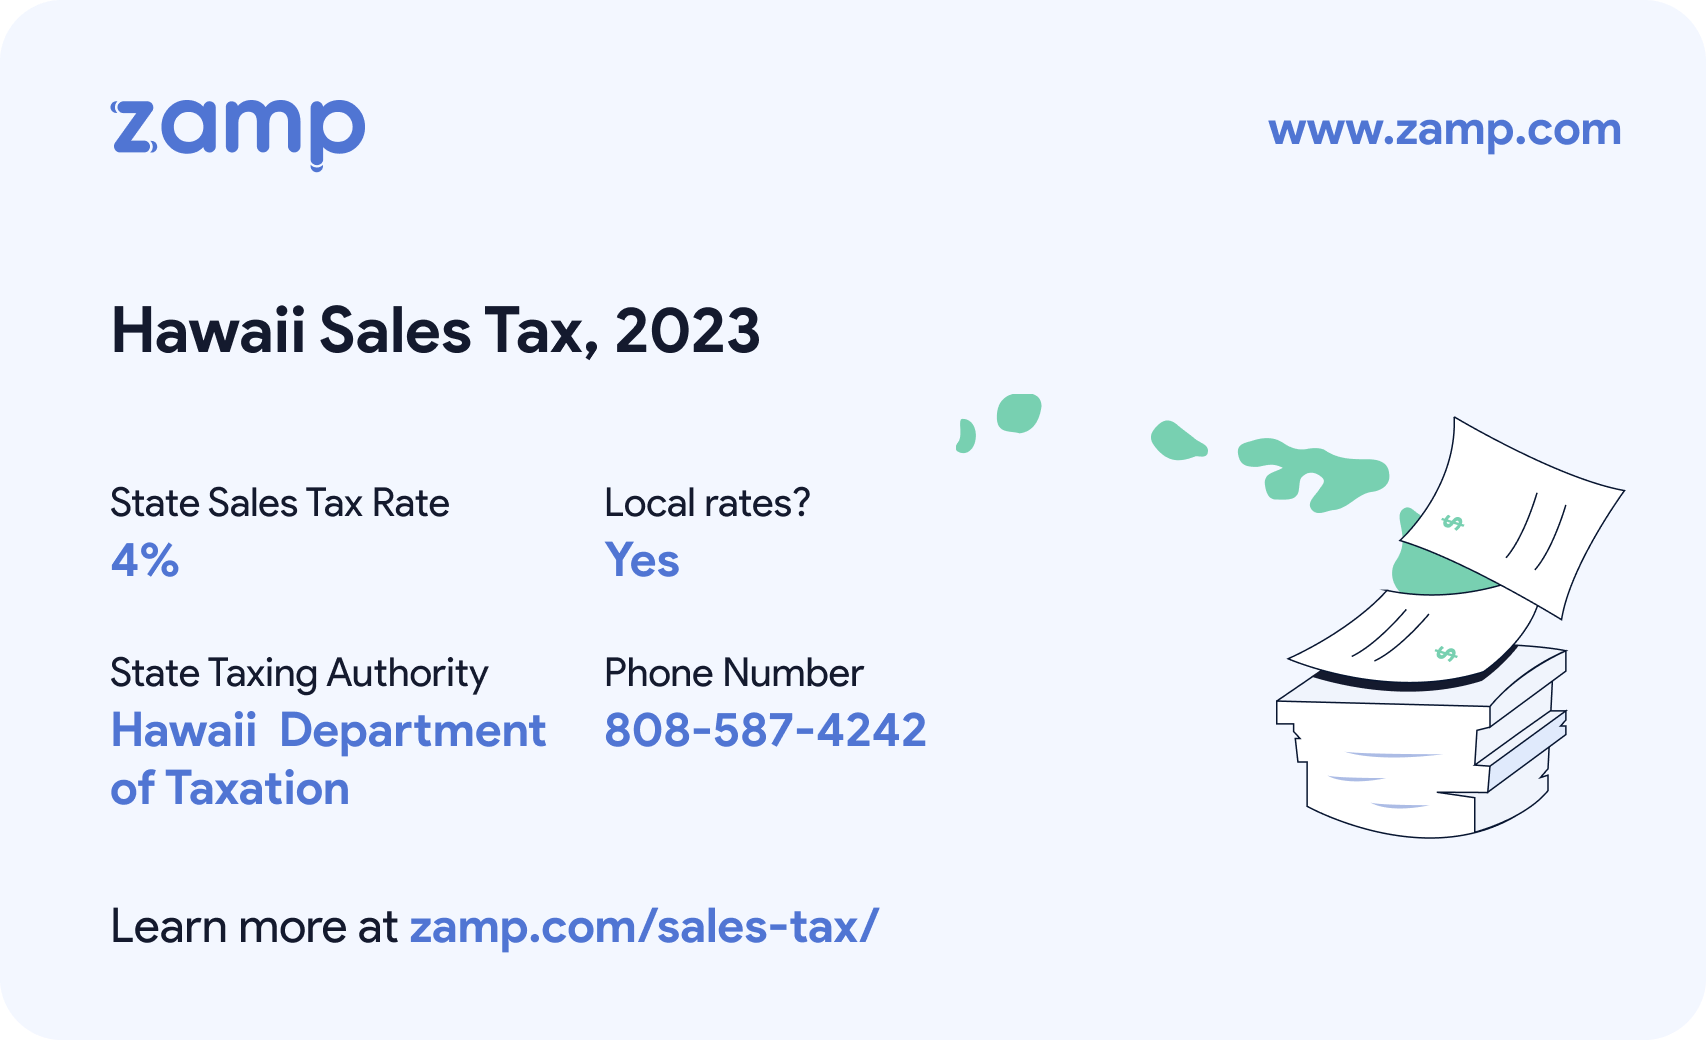 Hawaii basic sales tax info for 2023 - State sales tax rate: 4%, Local rates? Yes; State Taxing Authority: Hawaii Department of Taxation; and phone number 808-587-4242